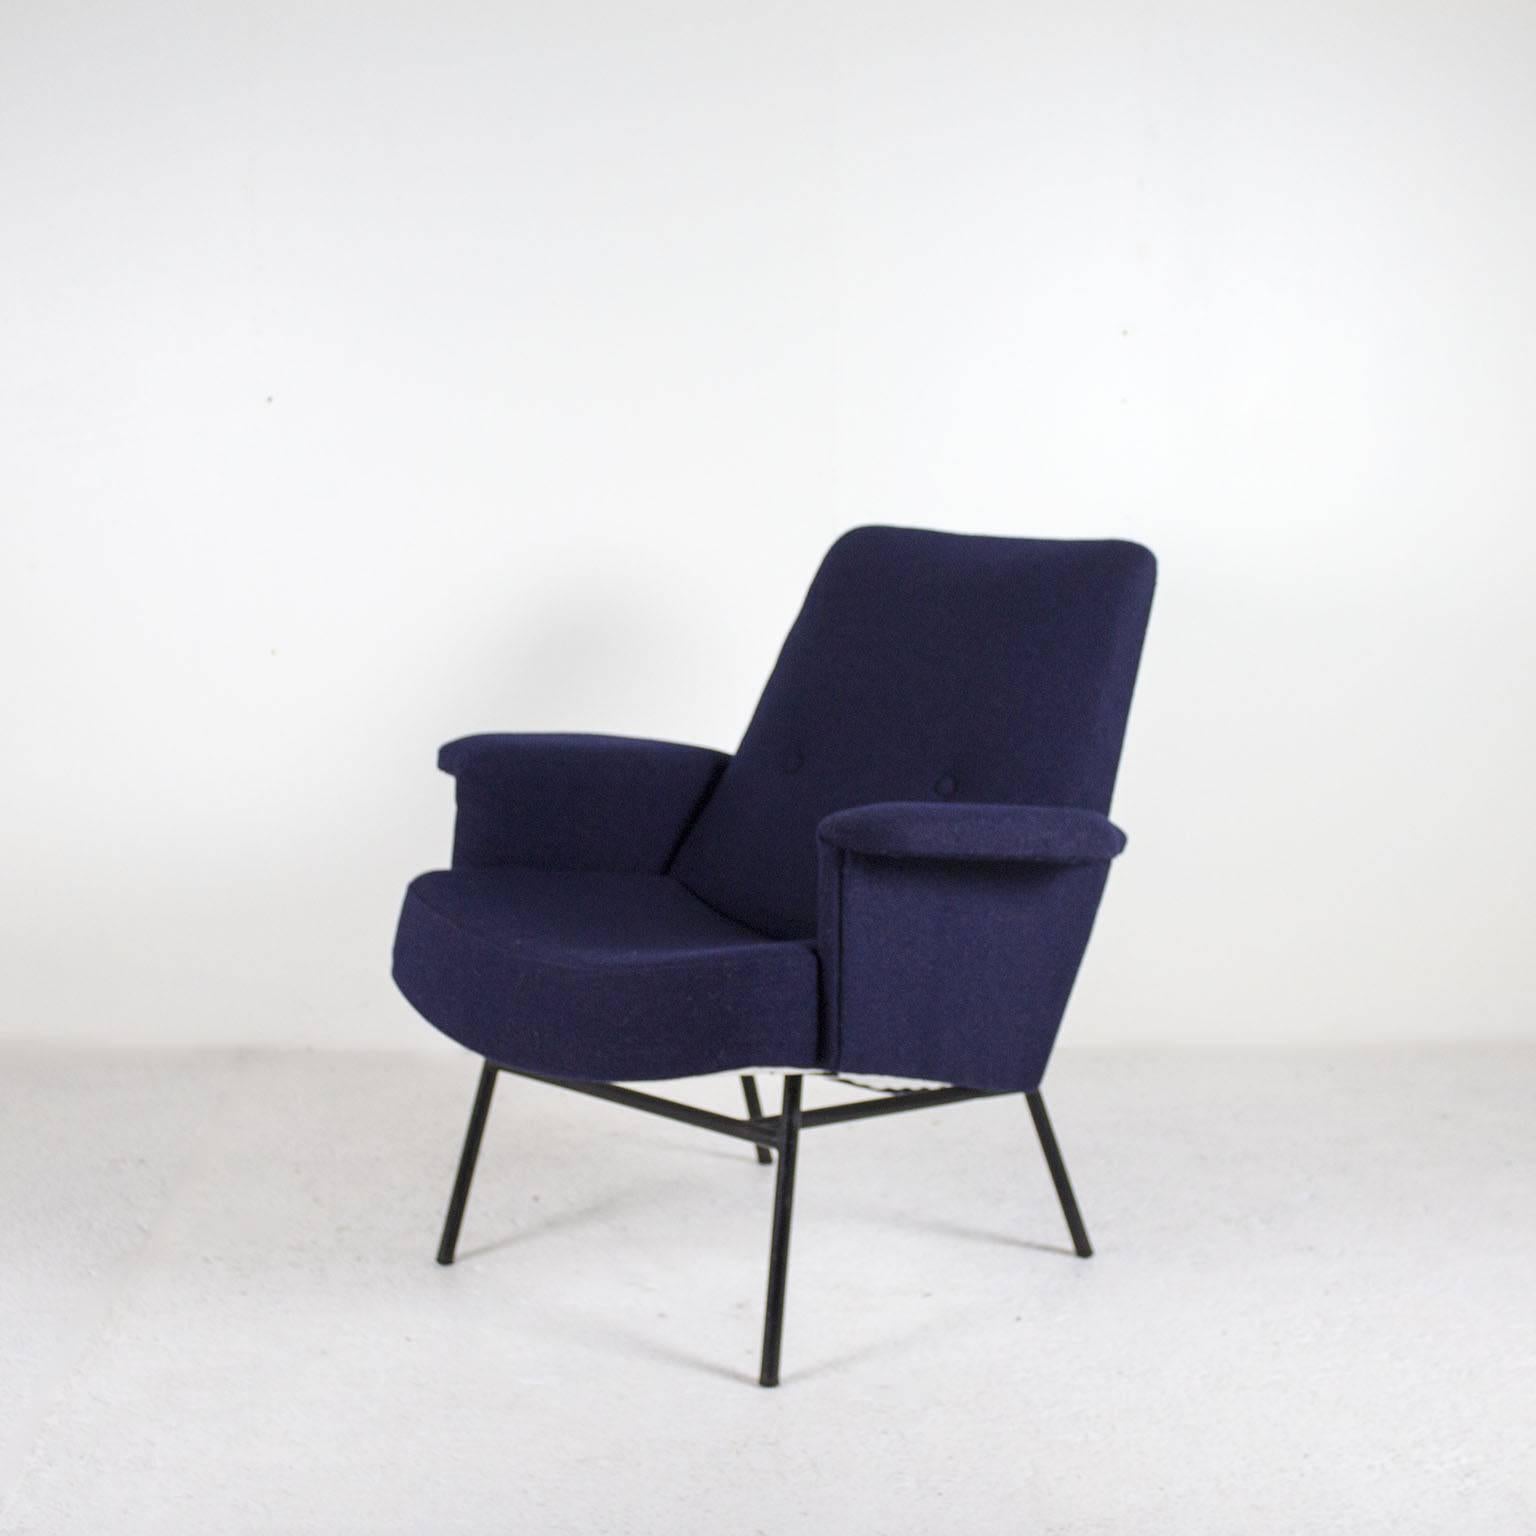 A splendid pair of 1950s armchairs by the famous French designer Pierre Guariche, model SK660, for the French brand Steiner. The frame is in tubular black-lacquered metal. The seats are newly renovated, in foam upholstered with a dark blue fabric by